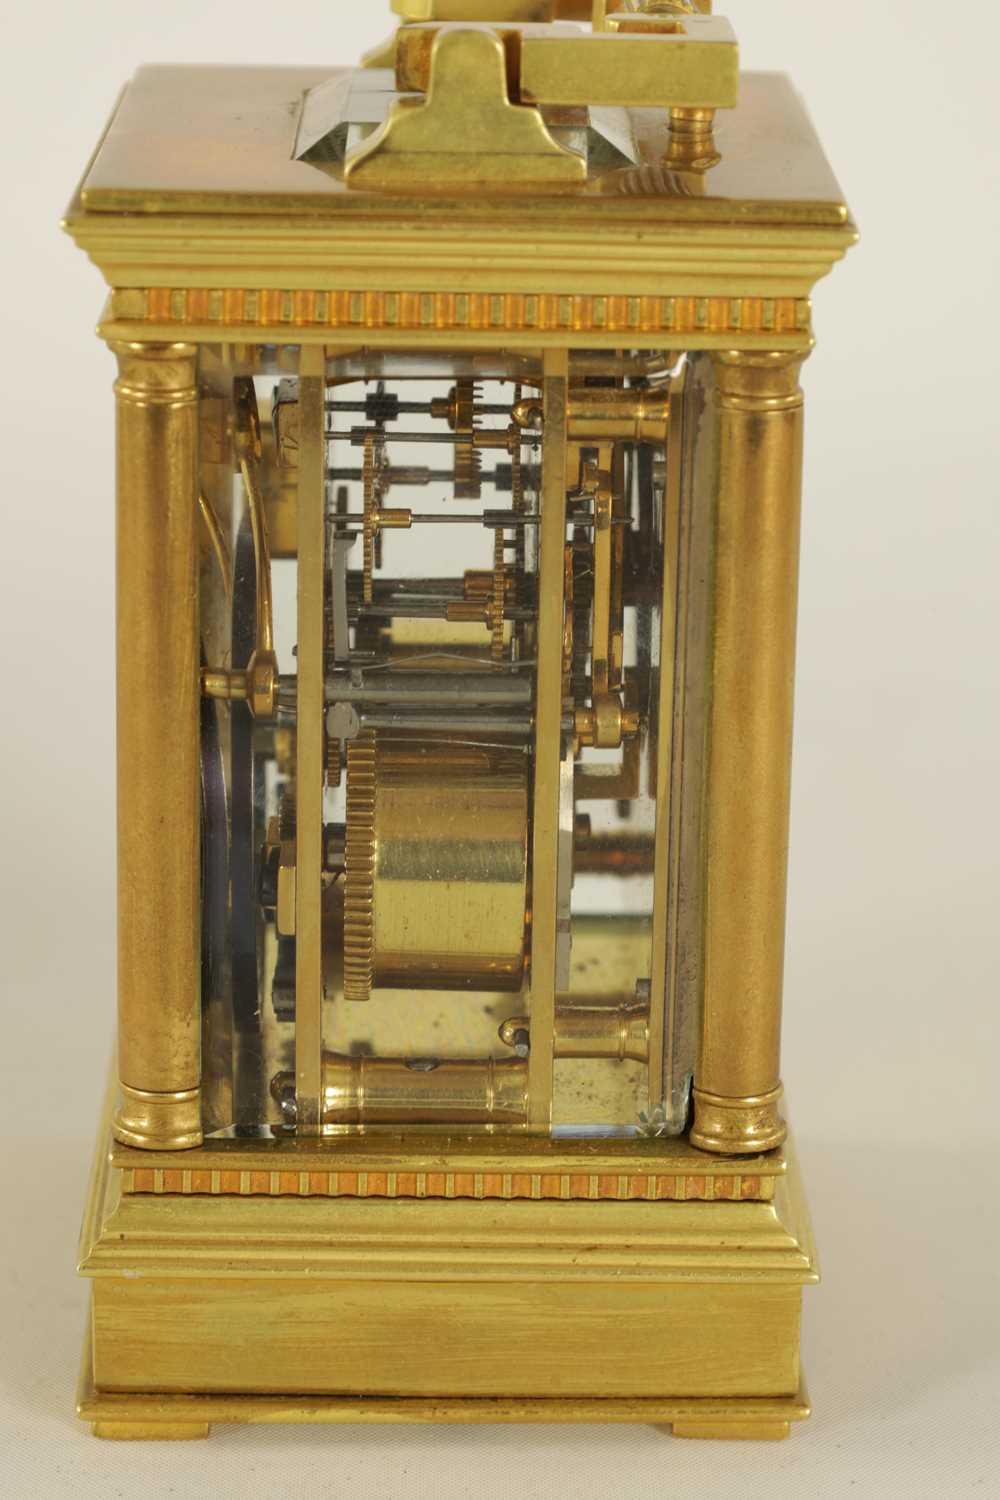 GAY AND LAMAILLE. A LATE 19TH CENTURY SMALL FRENCH REPEATING CARRIAGE CLOCK - Image 7 of 7